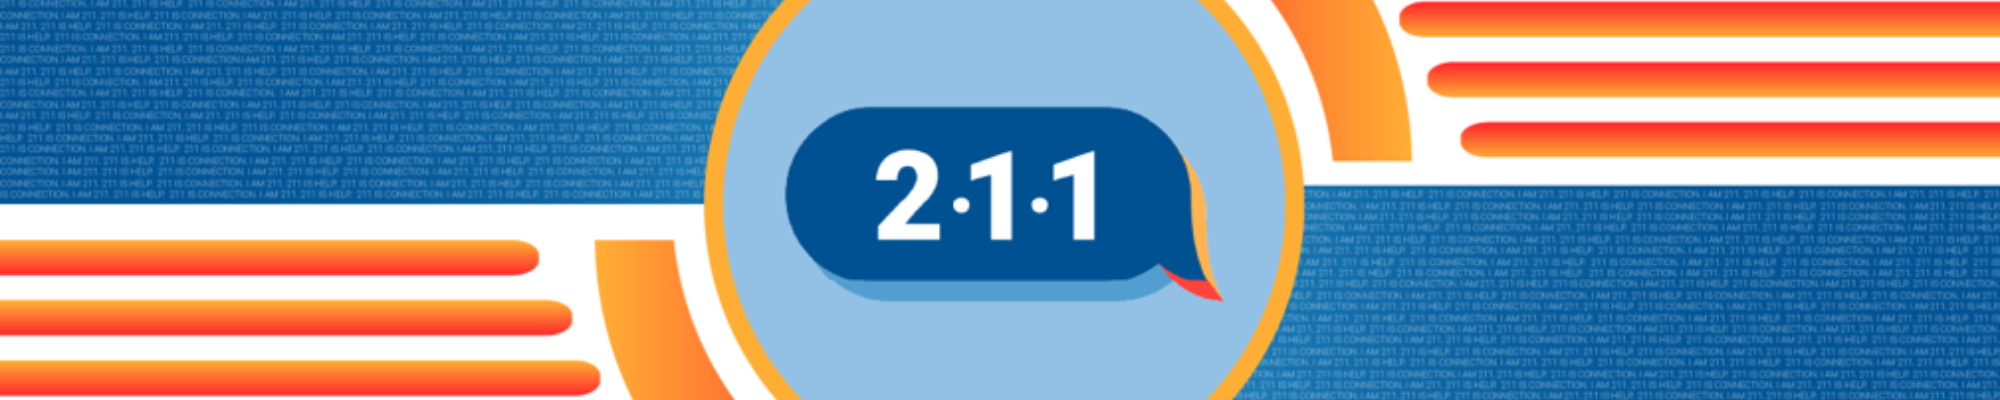 An image with red and blue lines that says 2-1-1 in the middle.